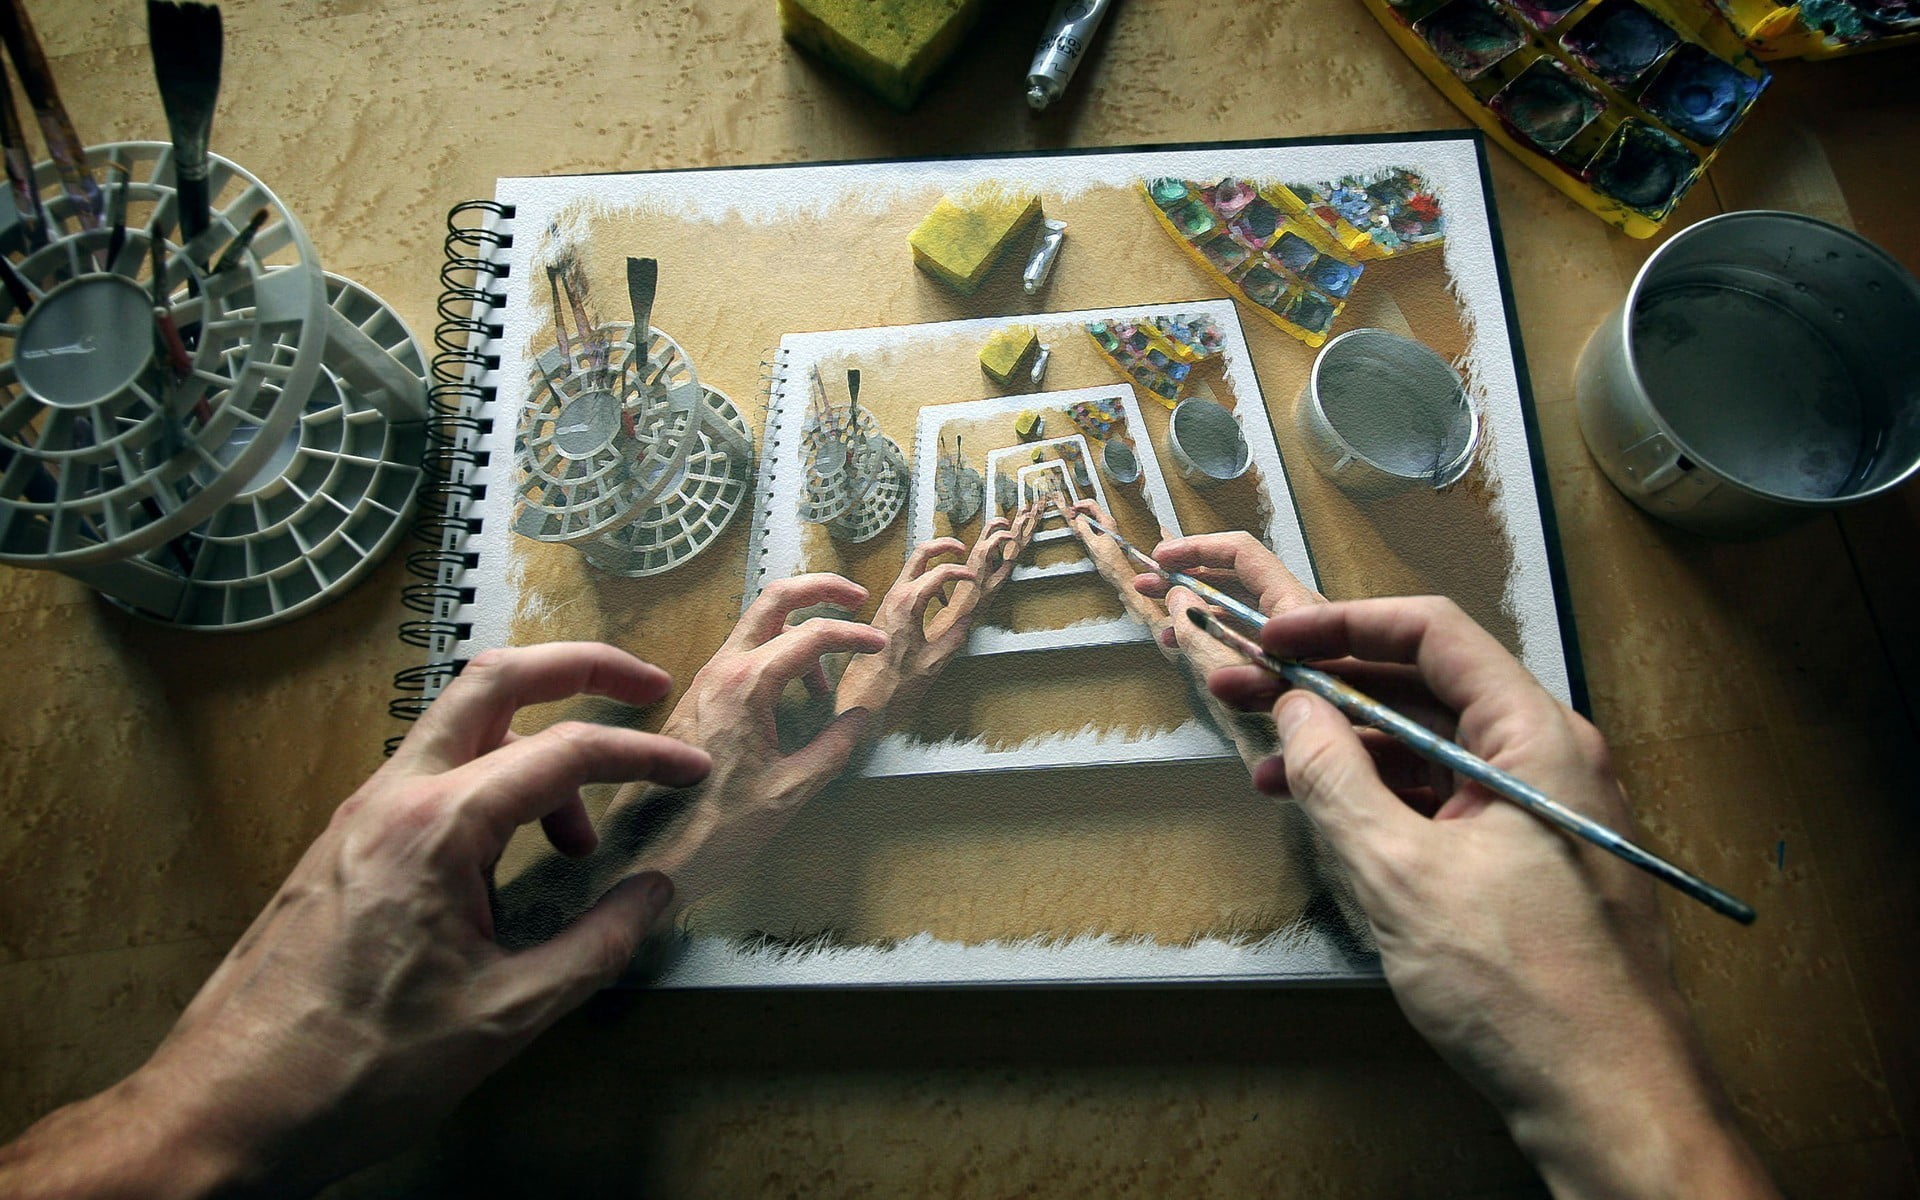 grey paint brush, painting, hands, recursion, human hand, art and craft